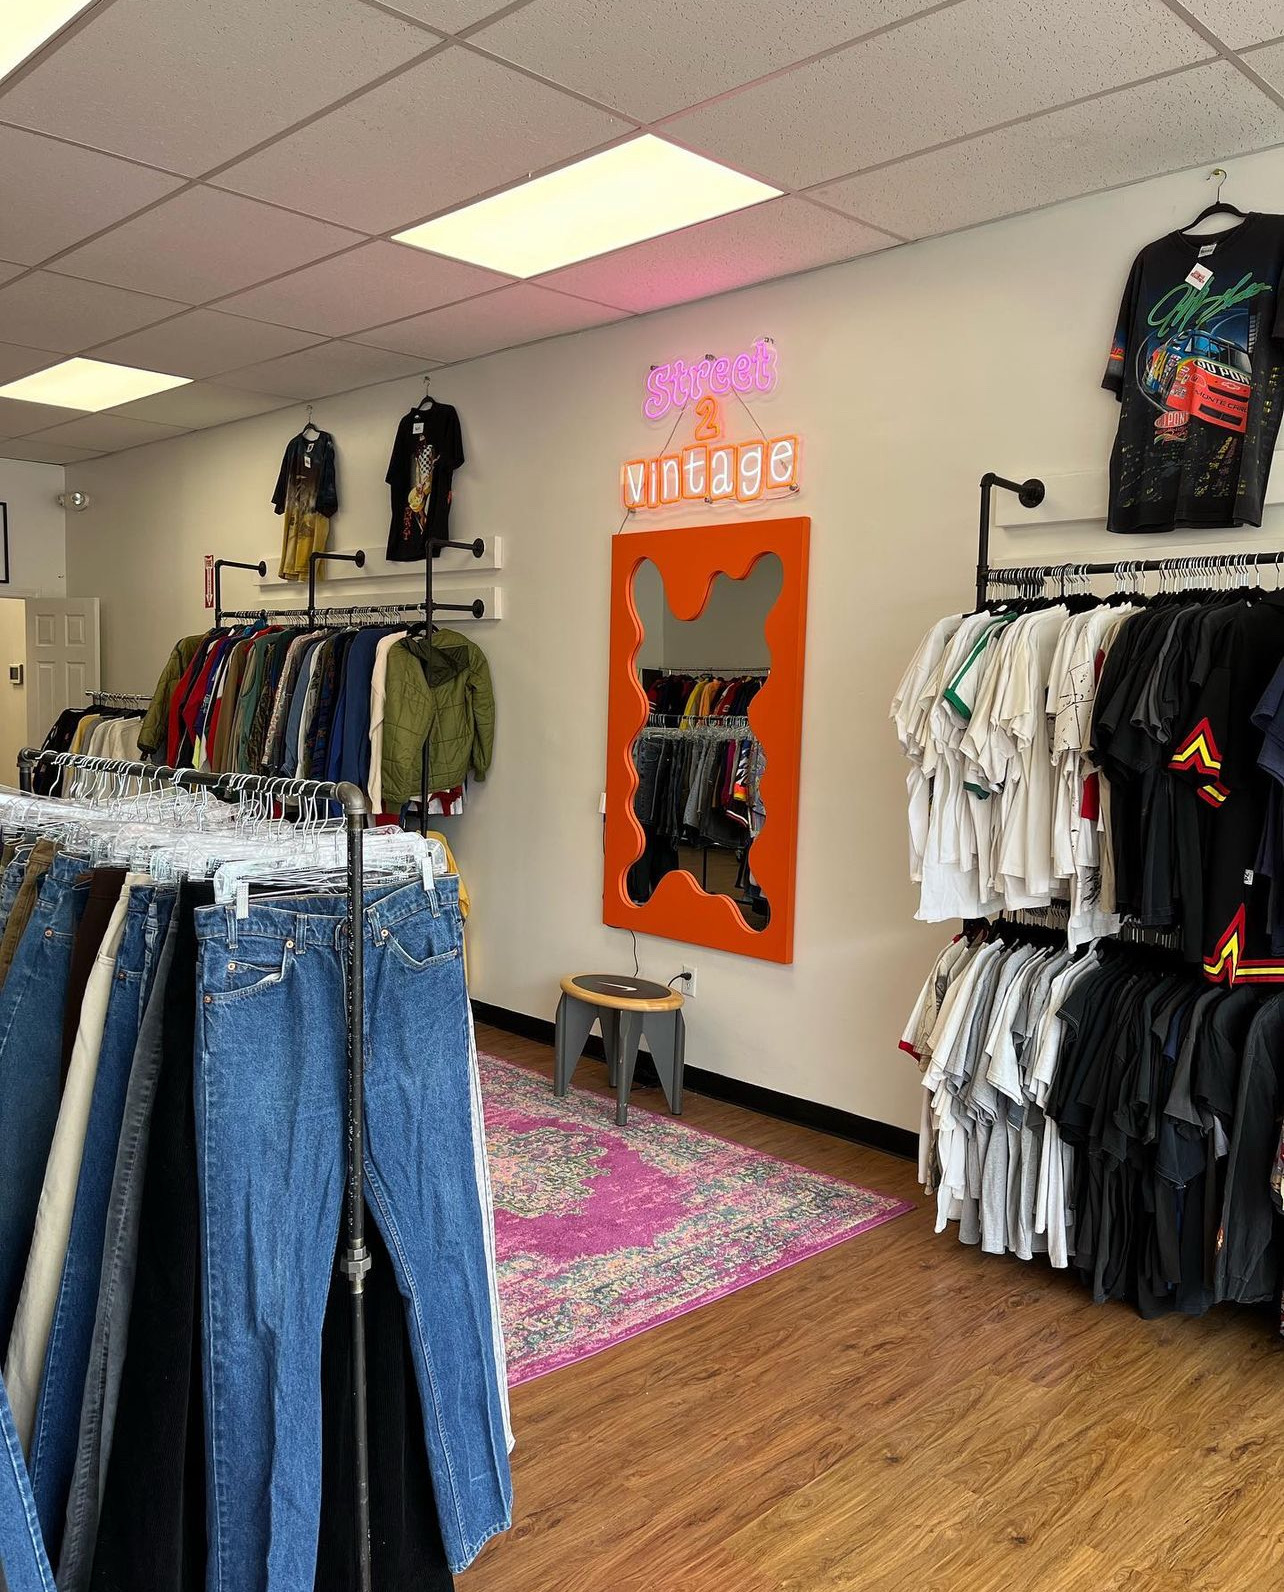 The interior of Shayla Boyd's vintage clothing store, Street2Vintage. Credit: Courtesy of Shayla Boyd